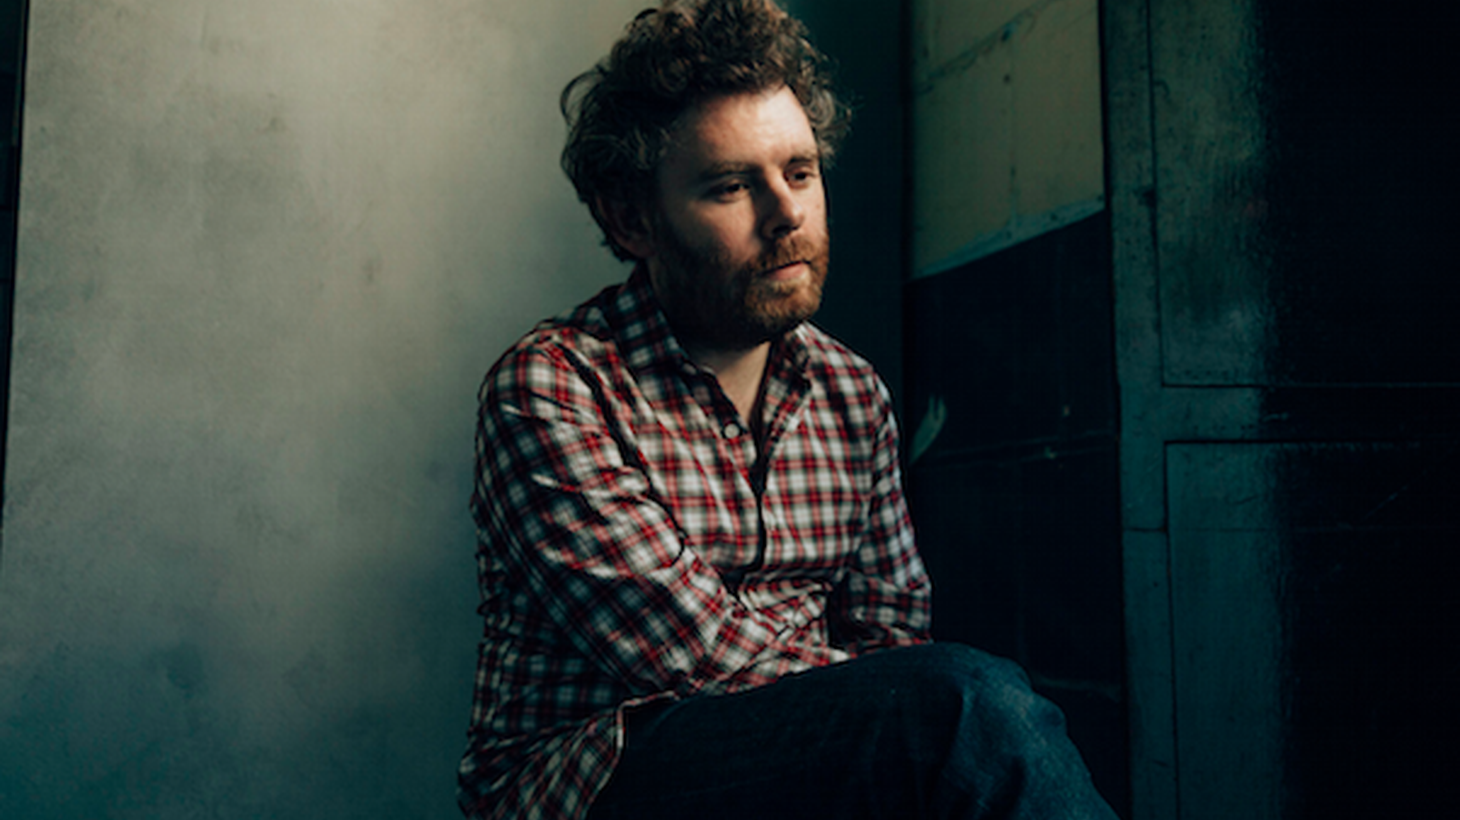 Brooklyn-based composer, pianist, and singer Gabriel Kahane released his debut on Nonesuch Records earlier this year.